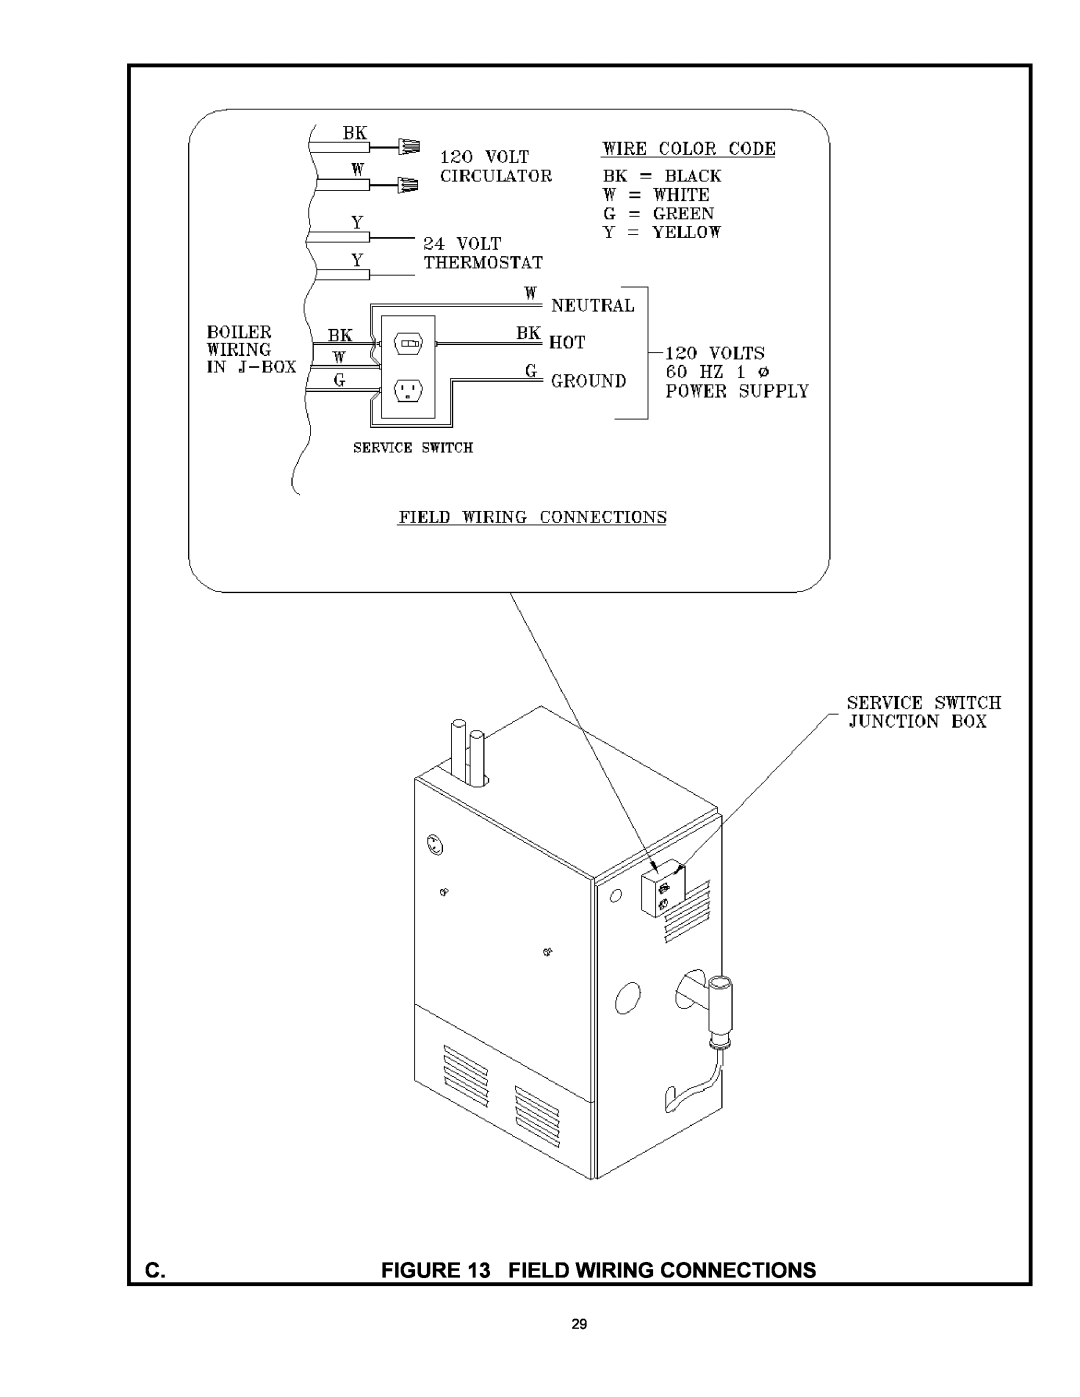 Quantum GAS-FIRED BOILERS installation instructions Field Wiring Connections 